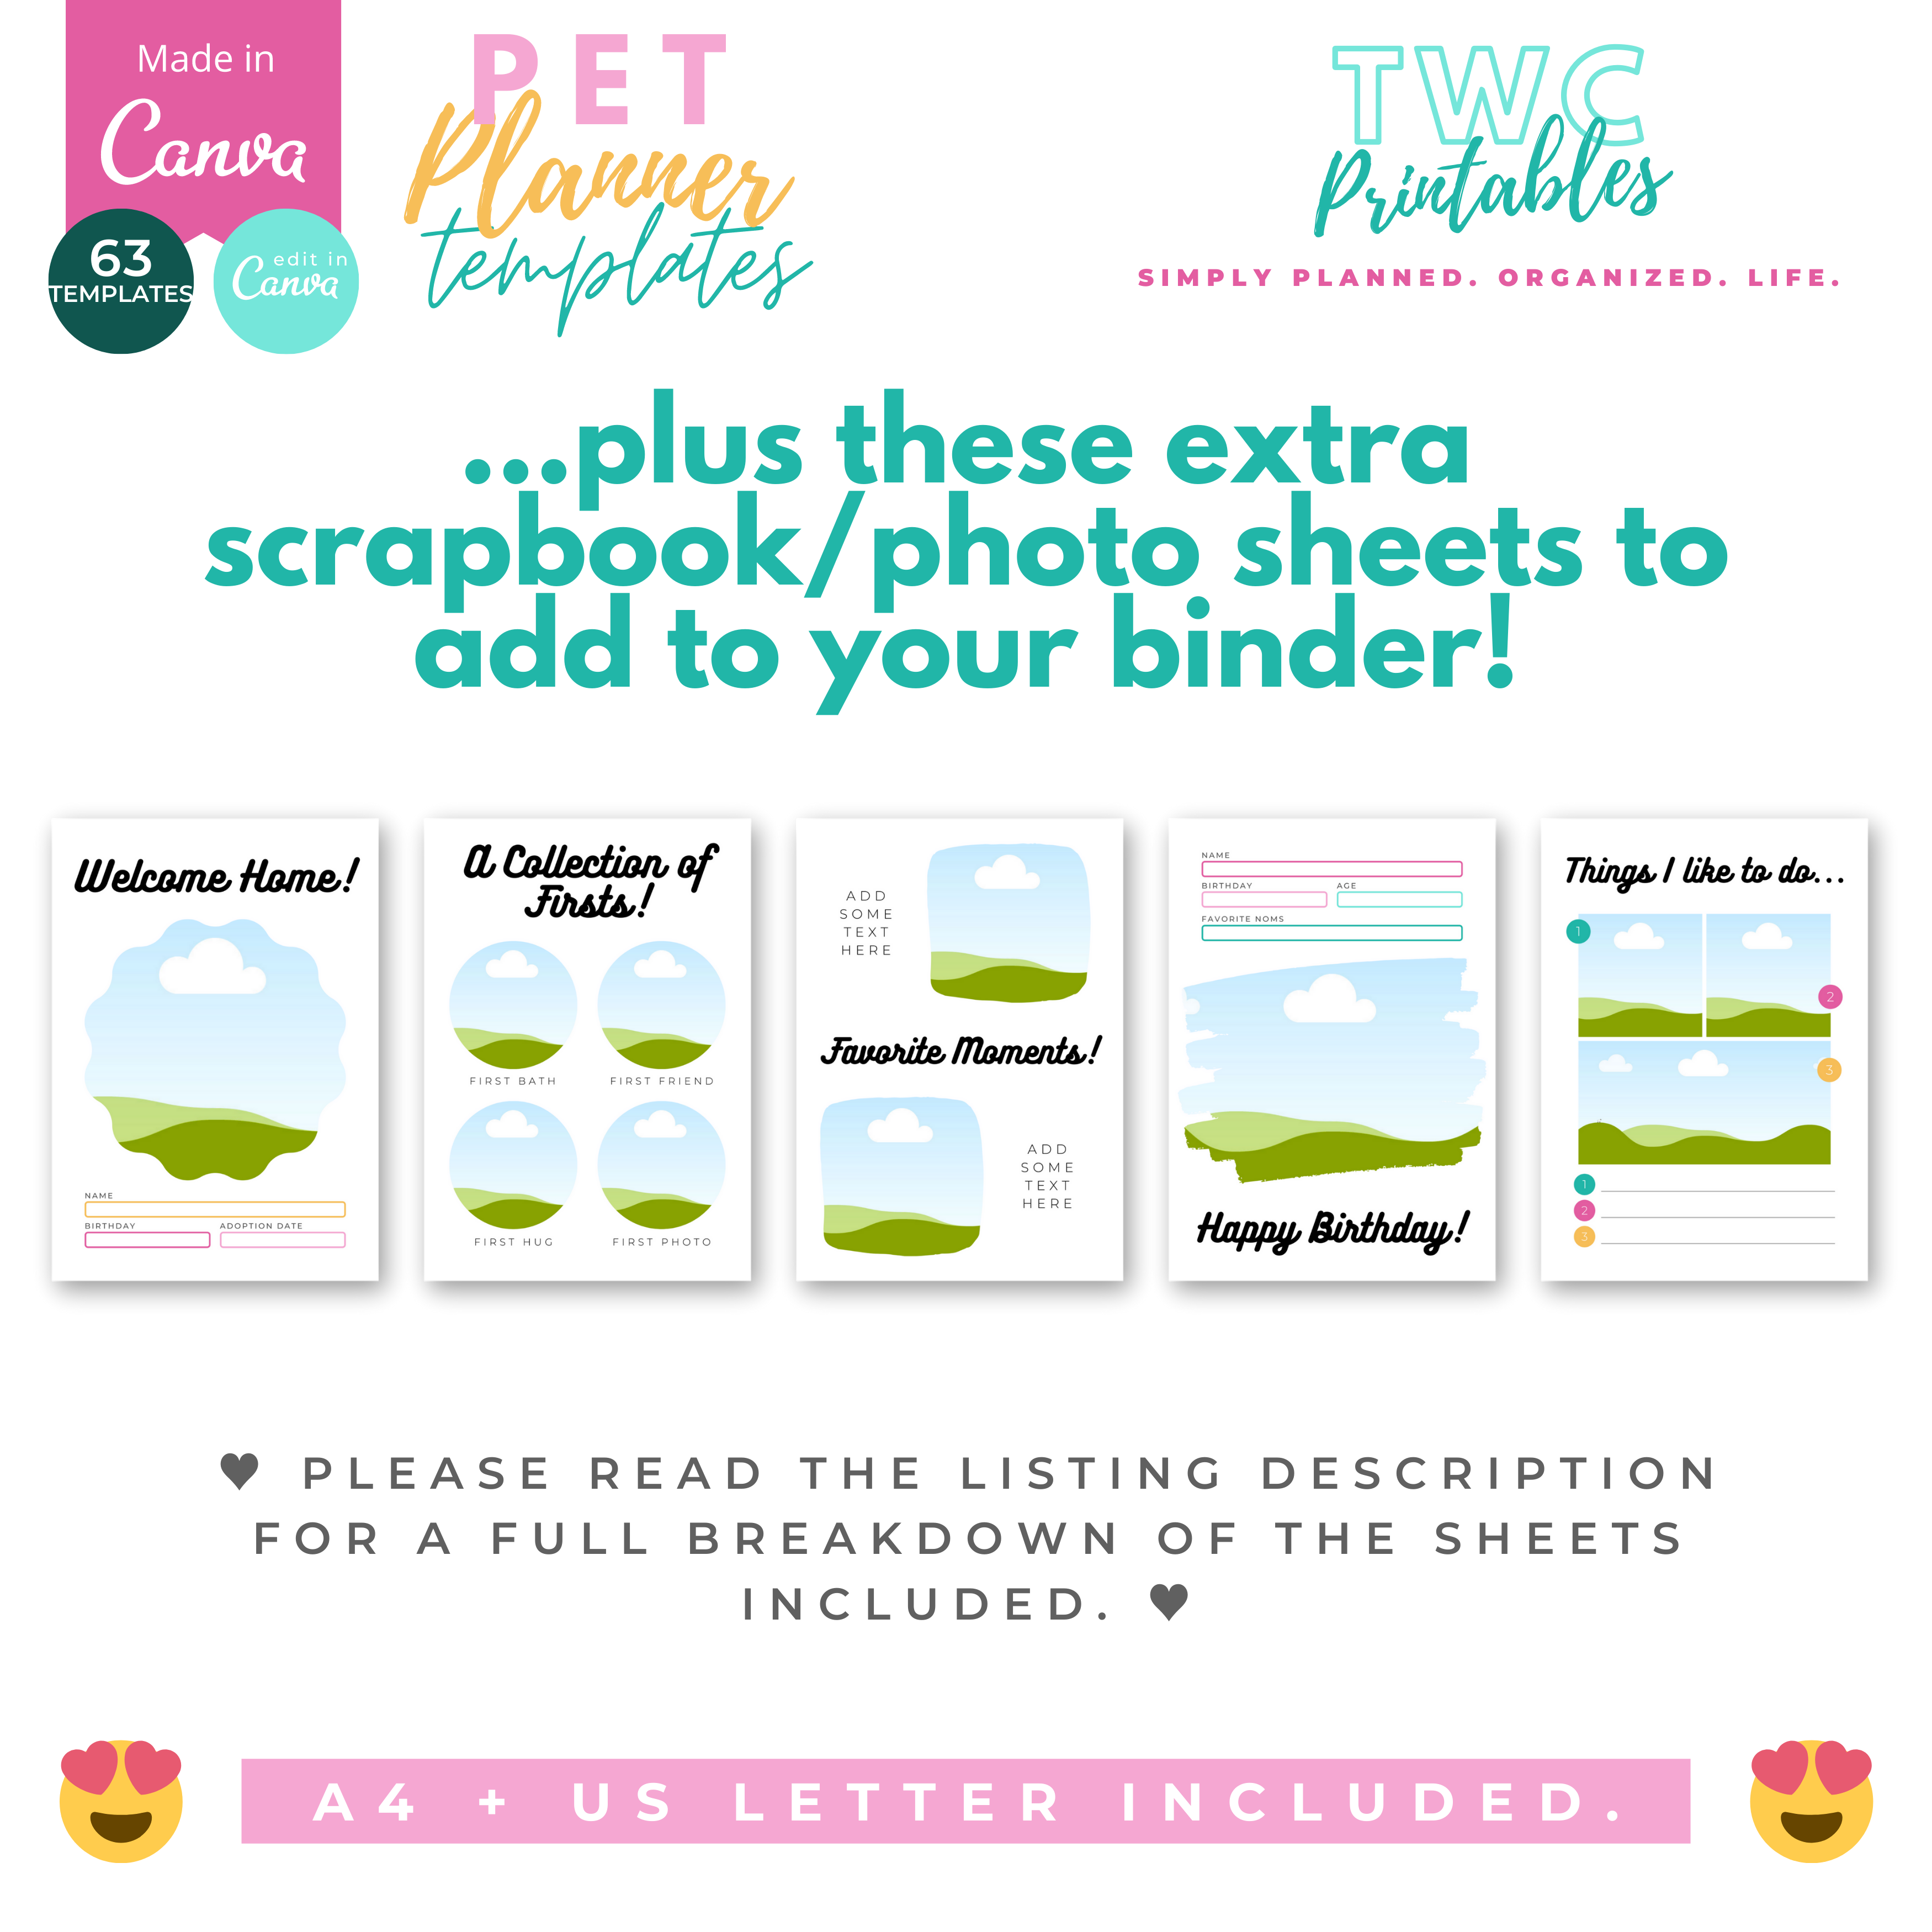 The editable pet planner templates for Canva will help you to create your own pet planner printable, or various pages for your pet organizer! Make your own pet care planner or puppy planner with this Canva kit! The planner is also great as pet owner gifts. It comes in a bright design, but you can change everything in these templates from fonts, colors, elements, shapes, layouts, and more! All you need is a free Canva account!